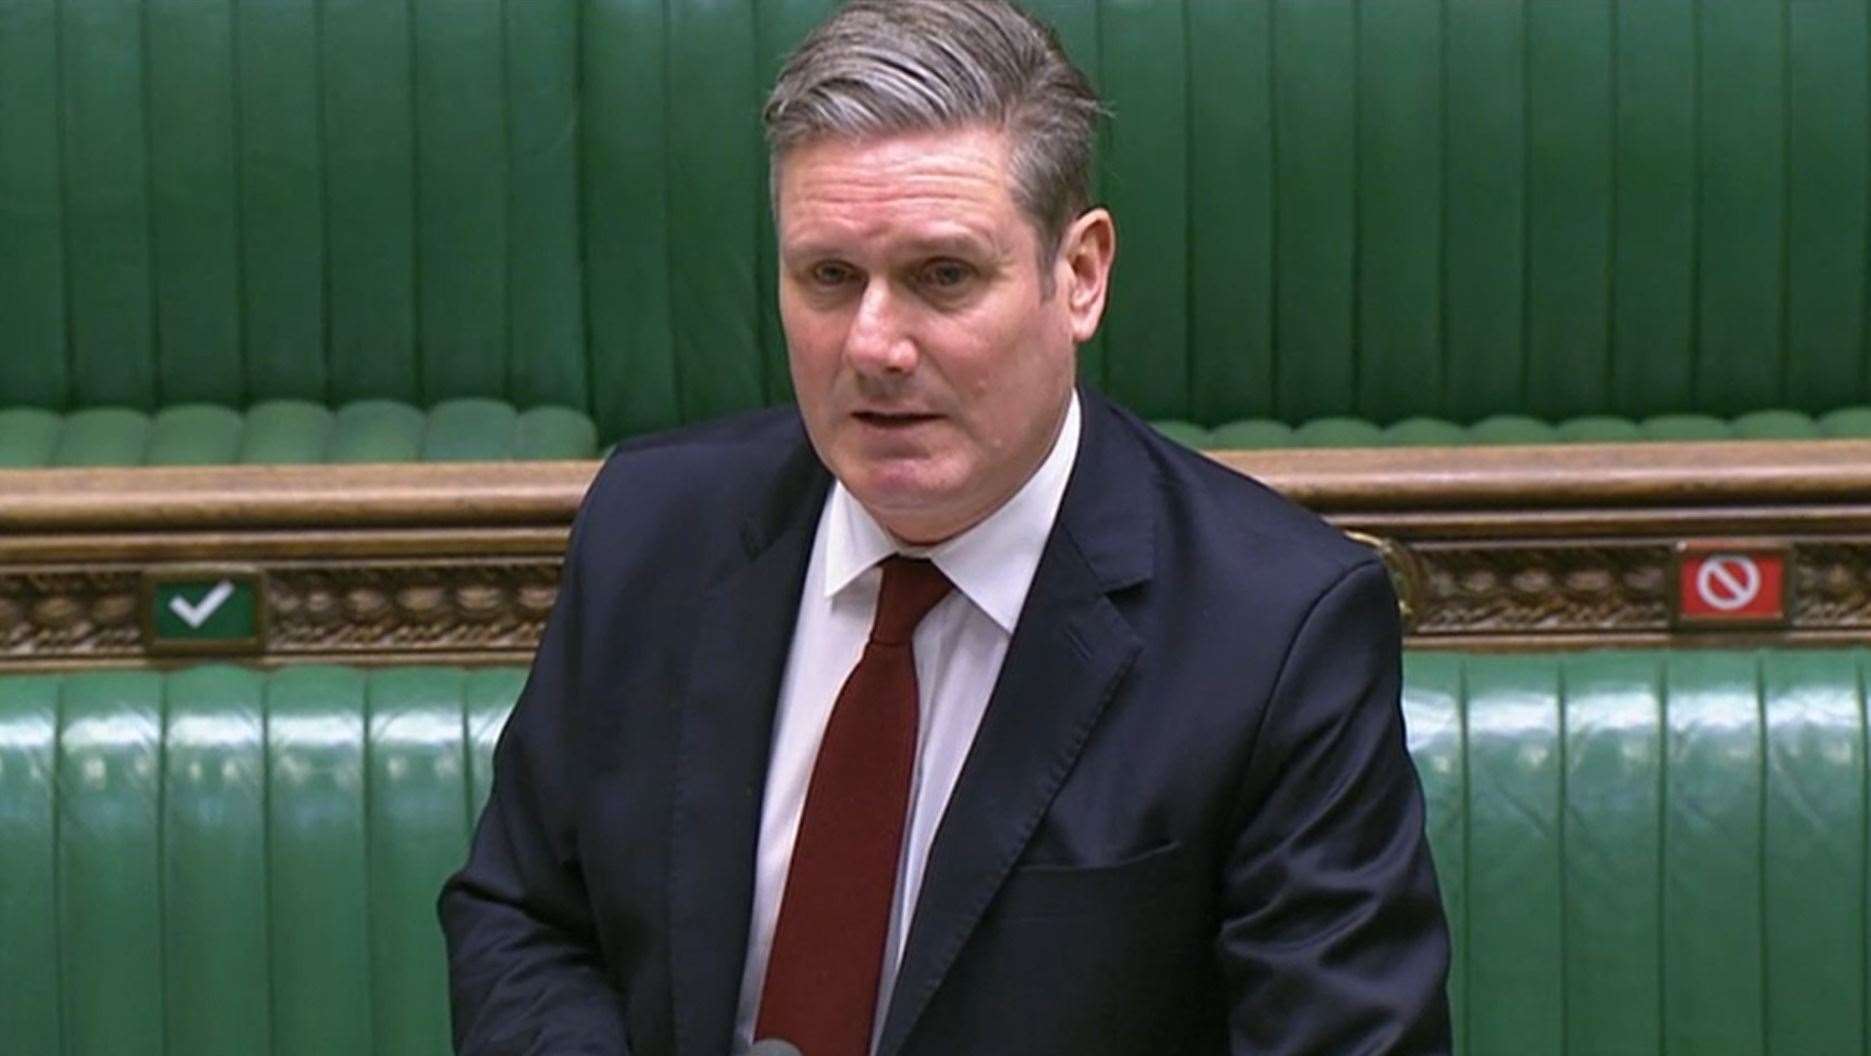 Sir Keir Starmer during the House of Commons debate on the EU (Future Relationship) Bill (House of Commons/PA)